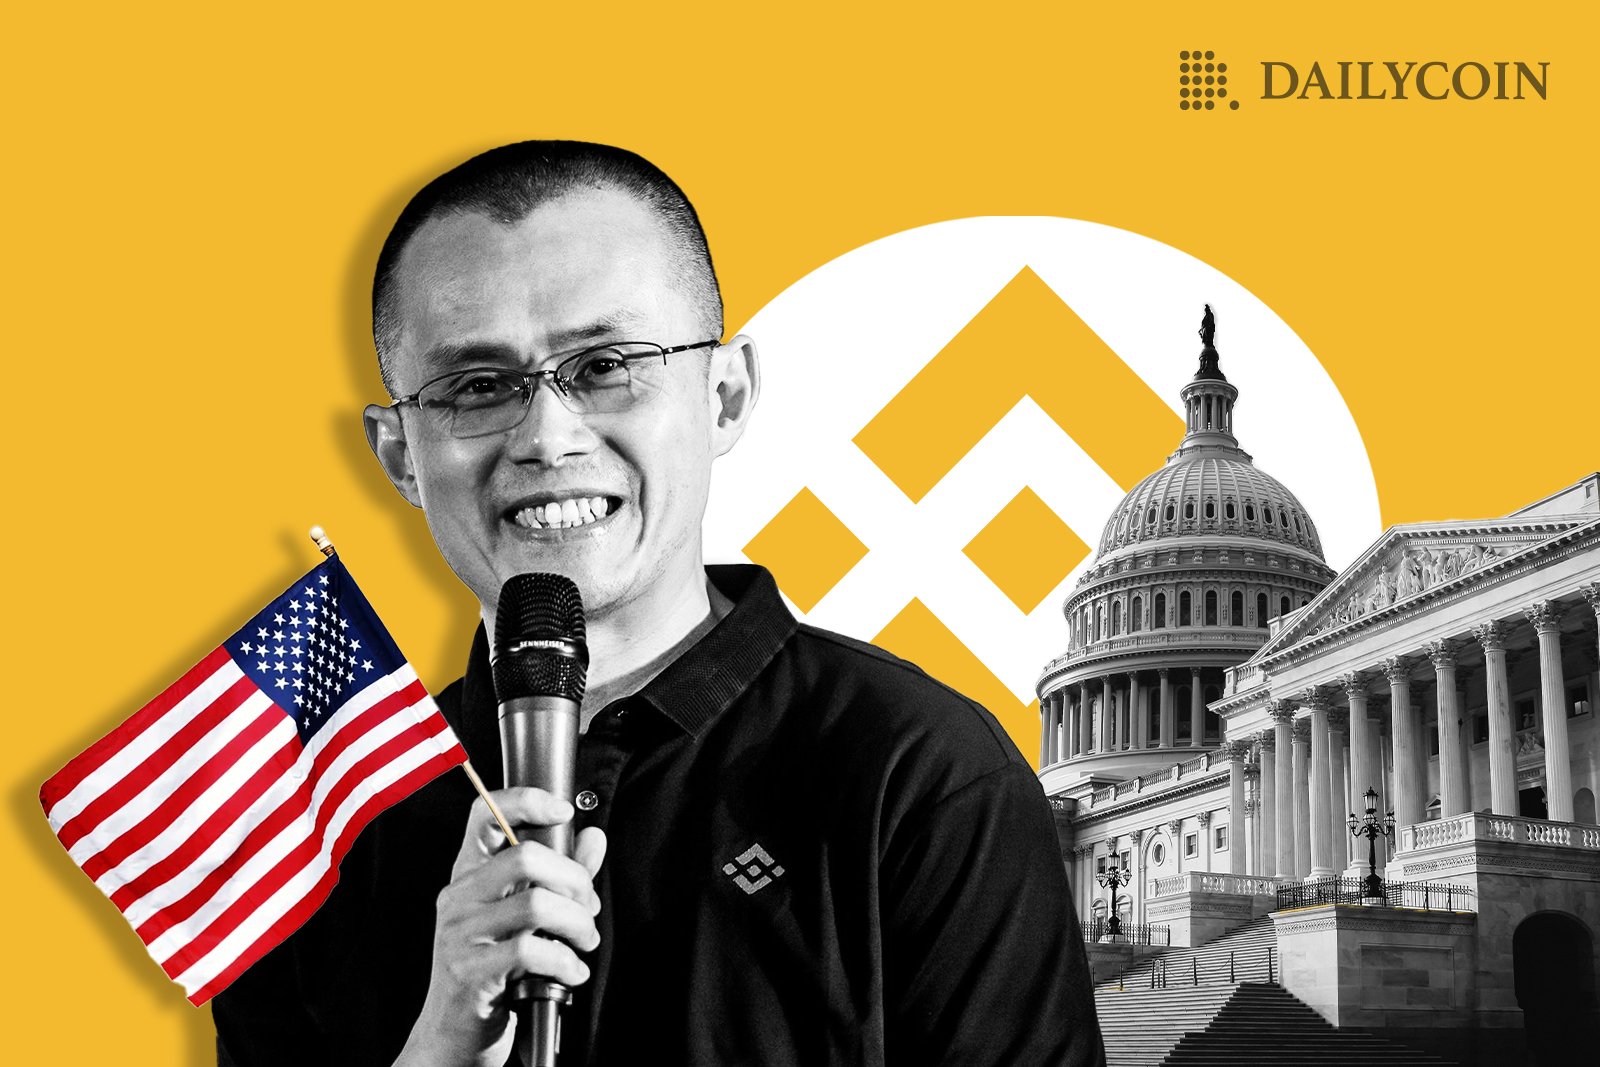 Changpeng Zhao holding a microphone and US flag in front of a capitol on a background with Binance logo